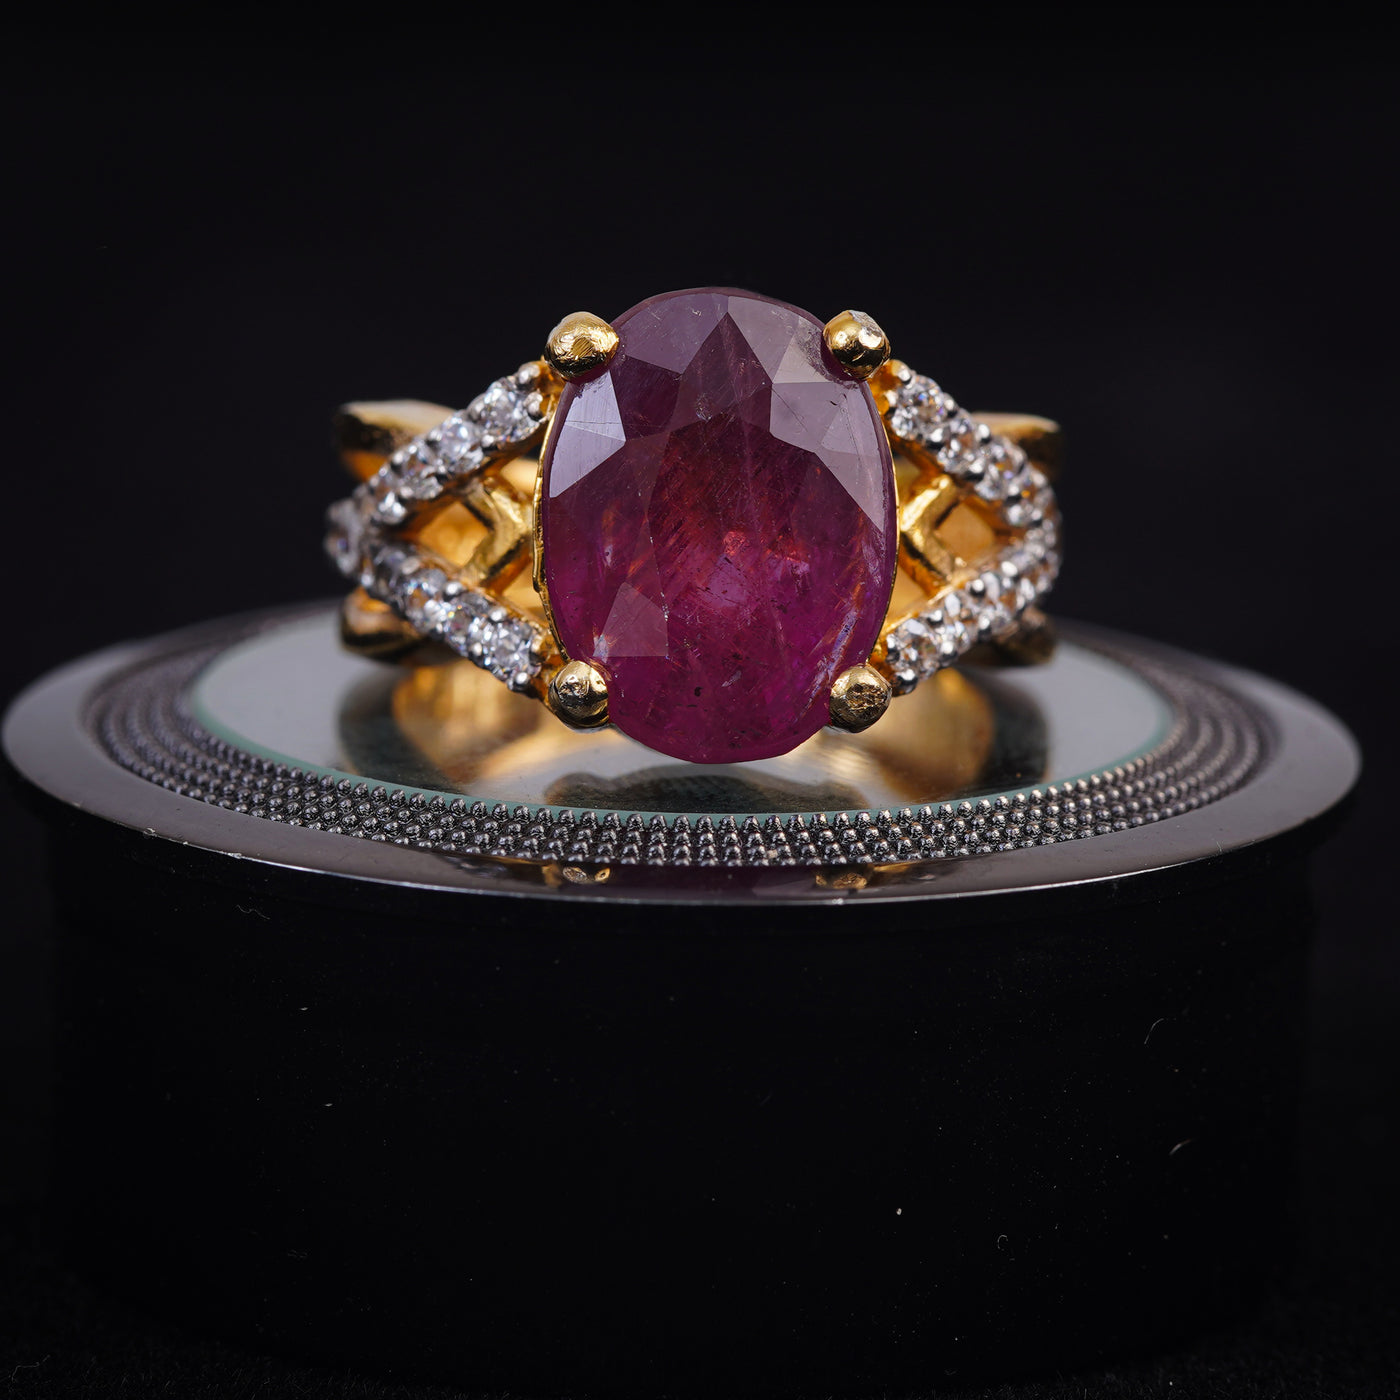 Buy natural Ruby grade 1 South African, female ring gold coated